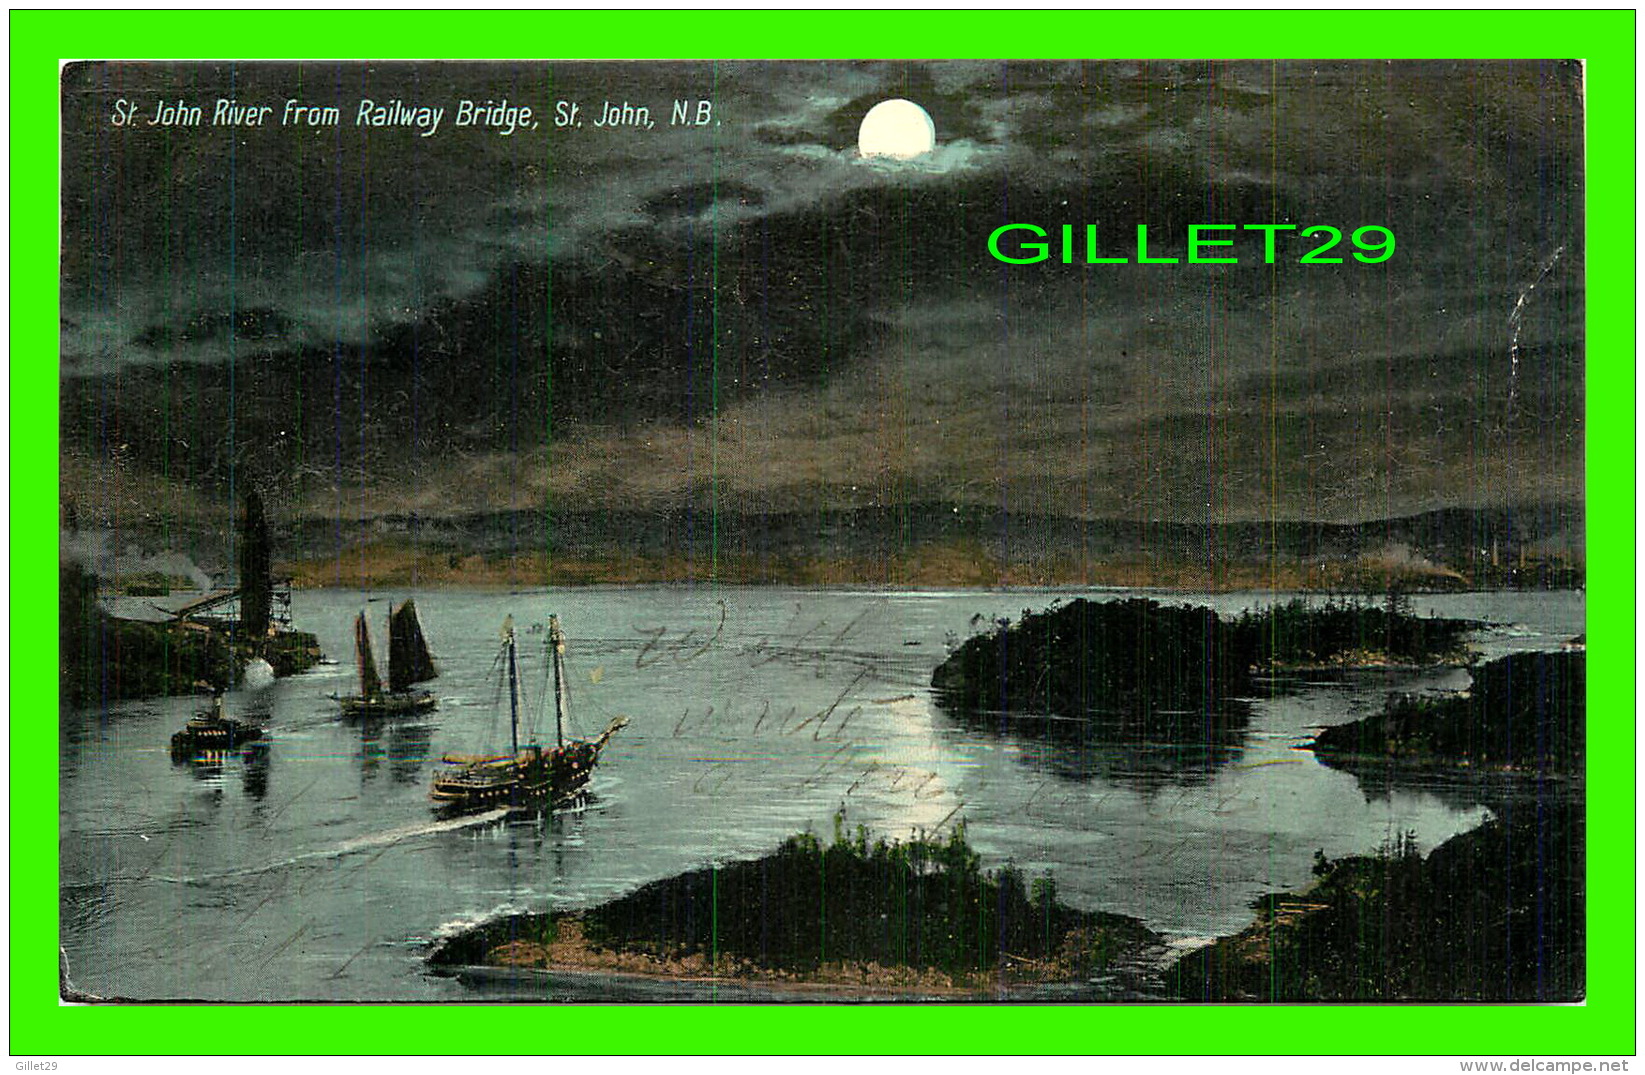 SUSSEX, NEW BRUNSWICK - ST JOHN RIVER FROM RAILWAY BRIDGE - ANIMATED WITH SHIPS - TRAVEL IN 1908 - THE VALENTINE &amp; S - St. John